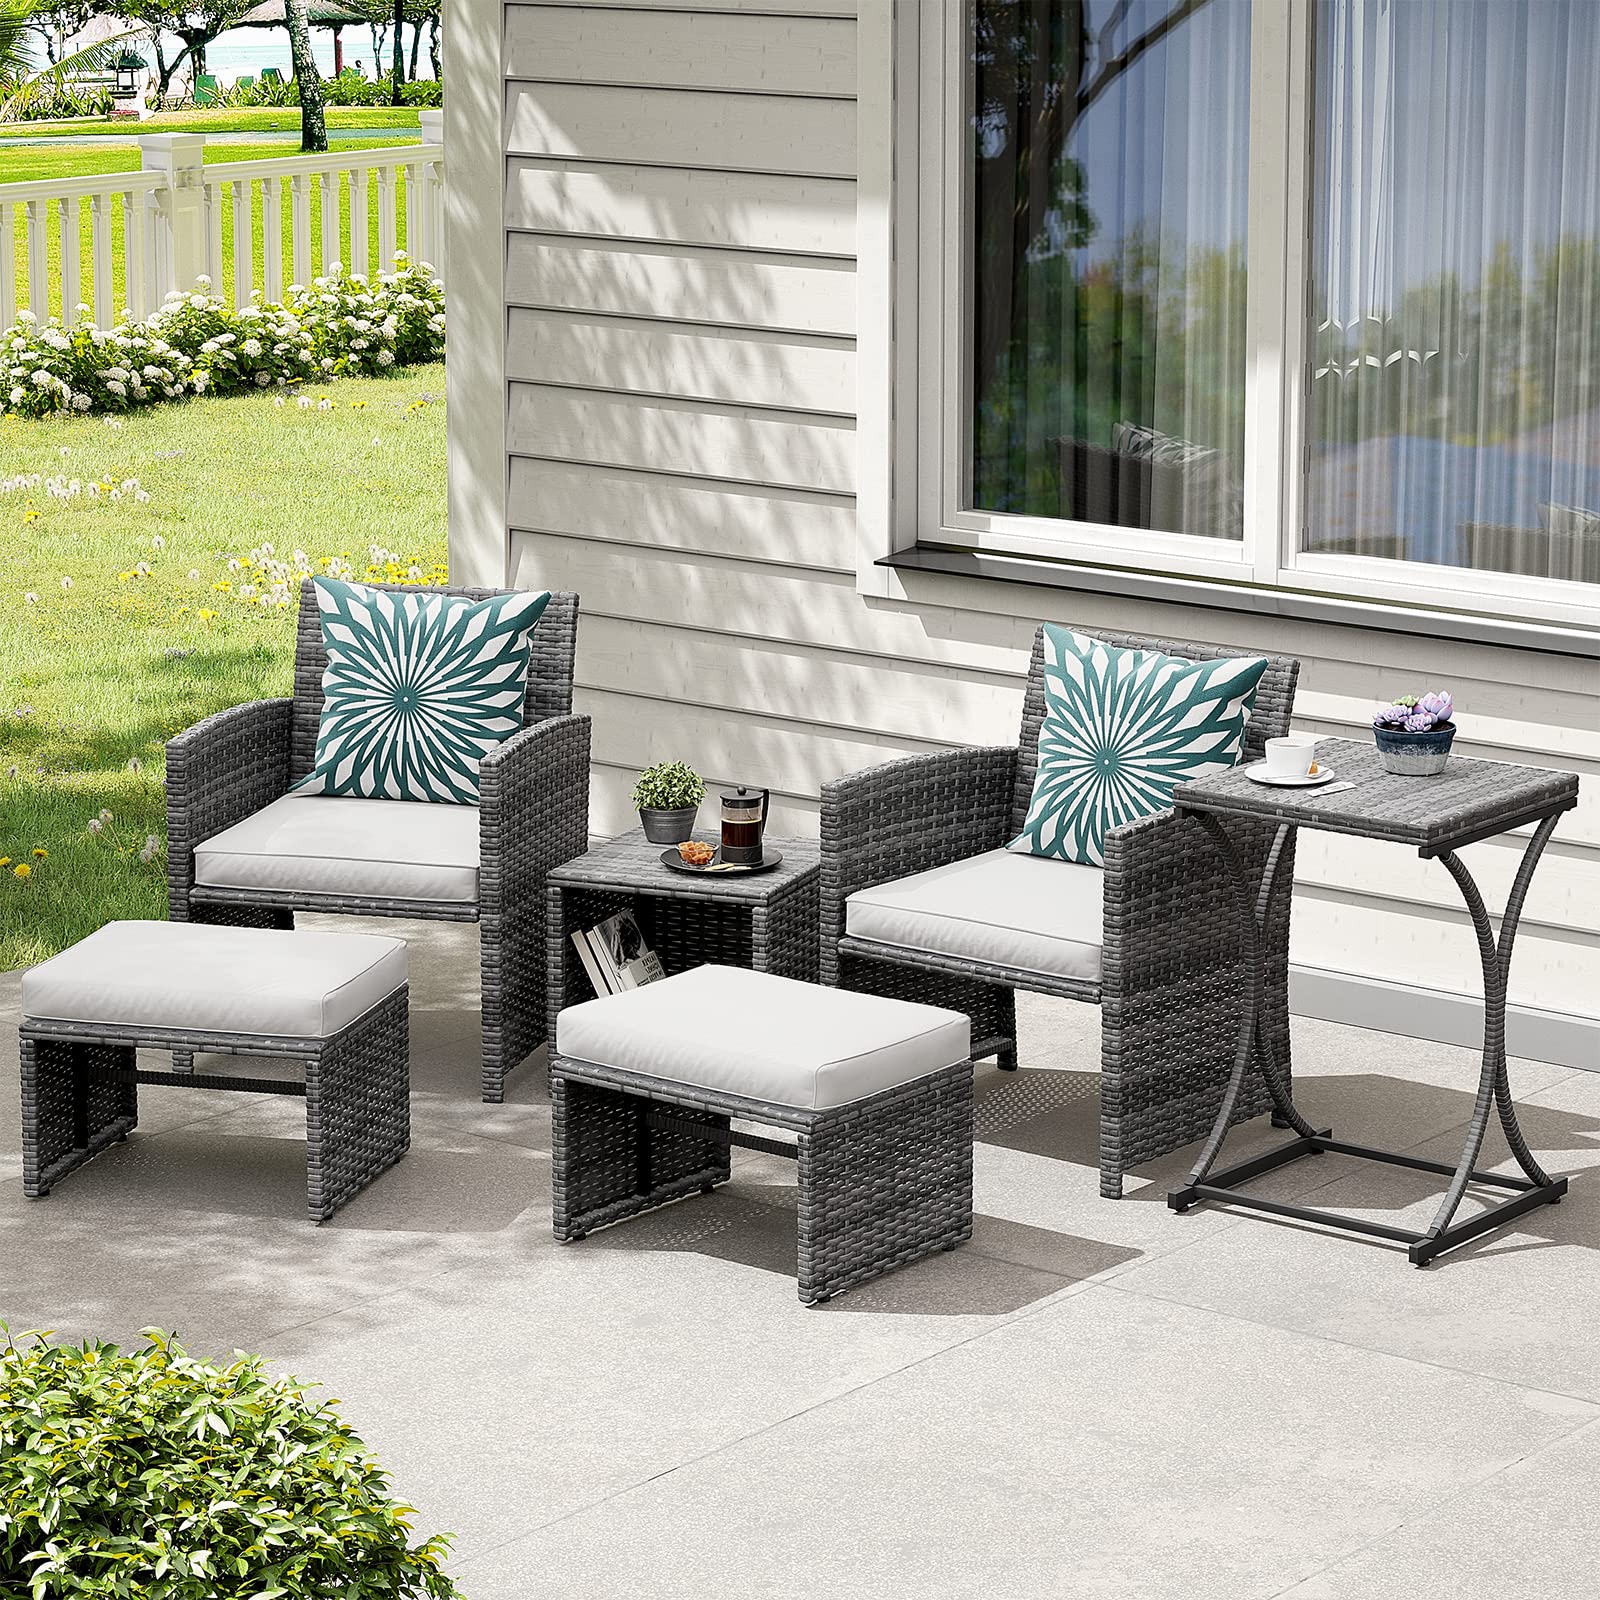 6pcs Wicker Patio Bistro Set Outdoor Conversation Set Patio Chairs with Ottomans & 2 Side Tables